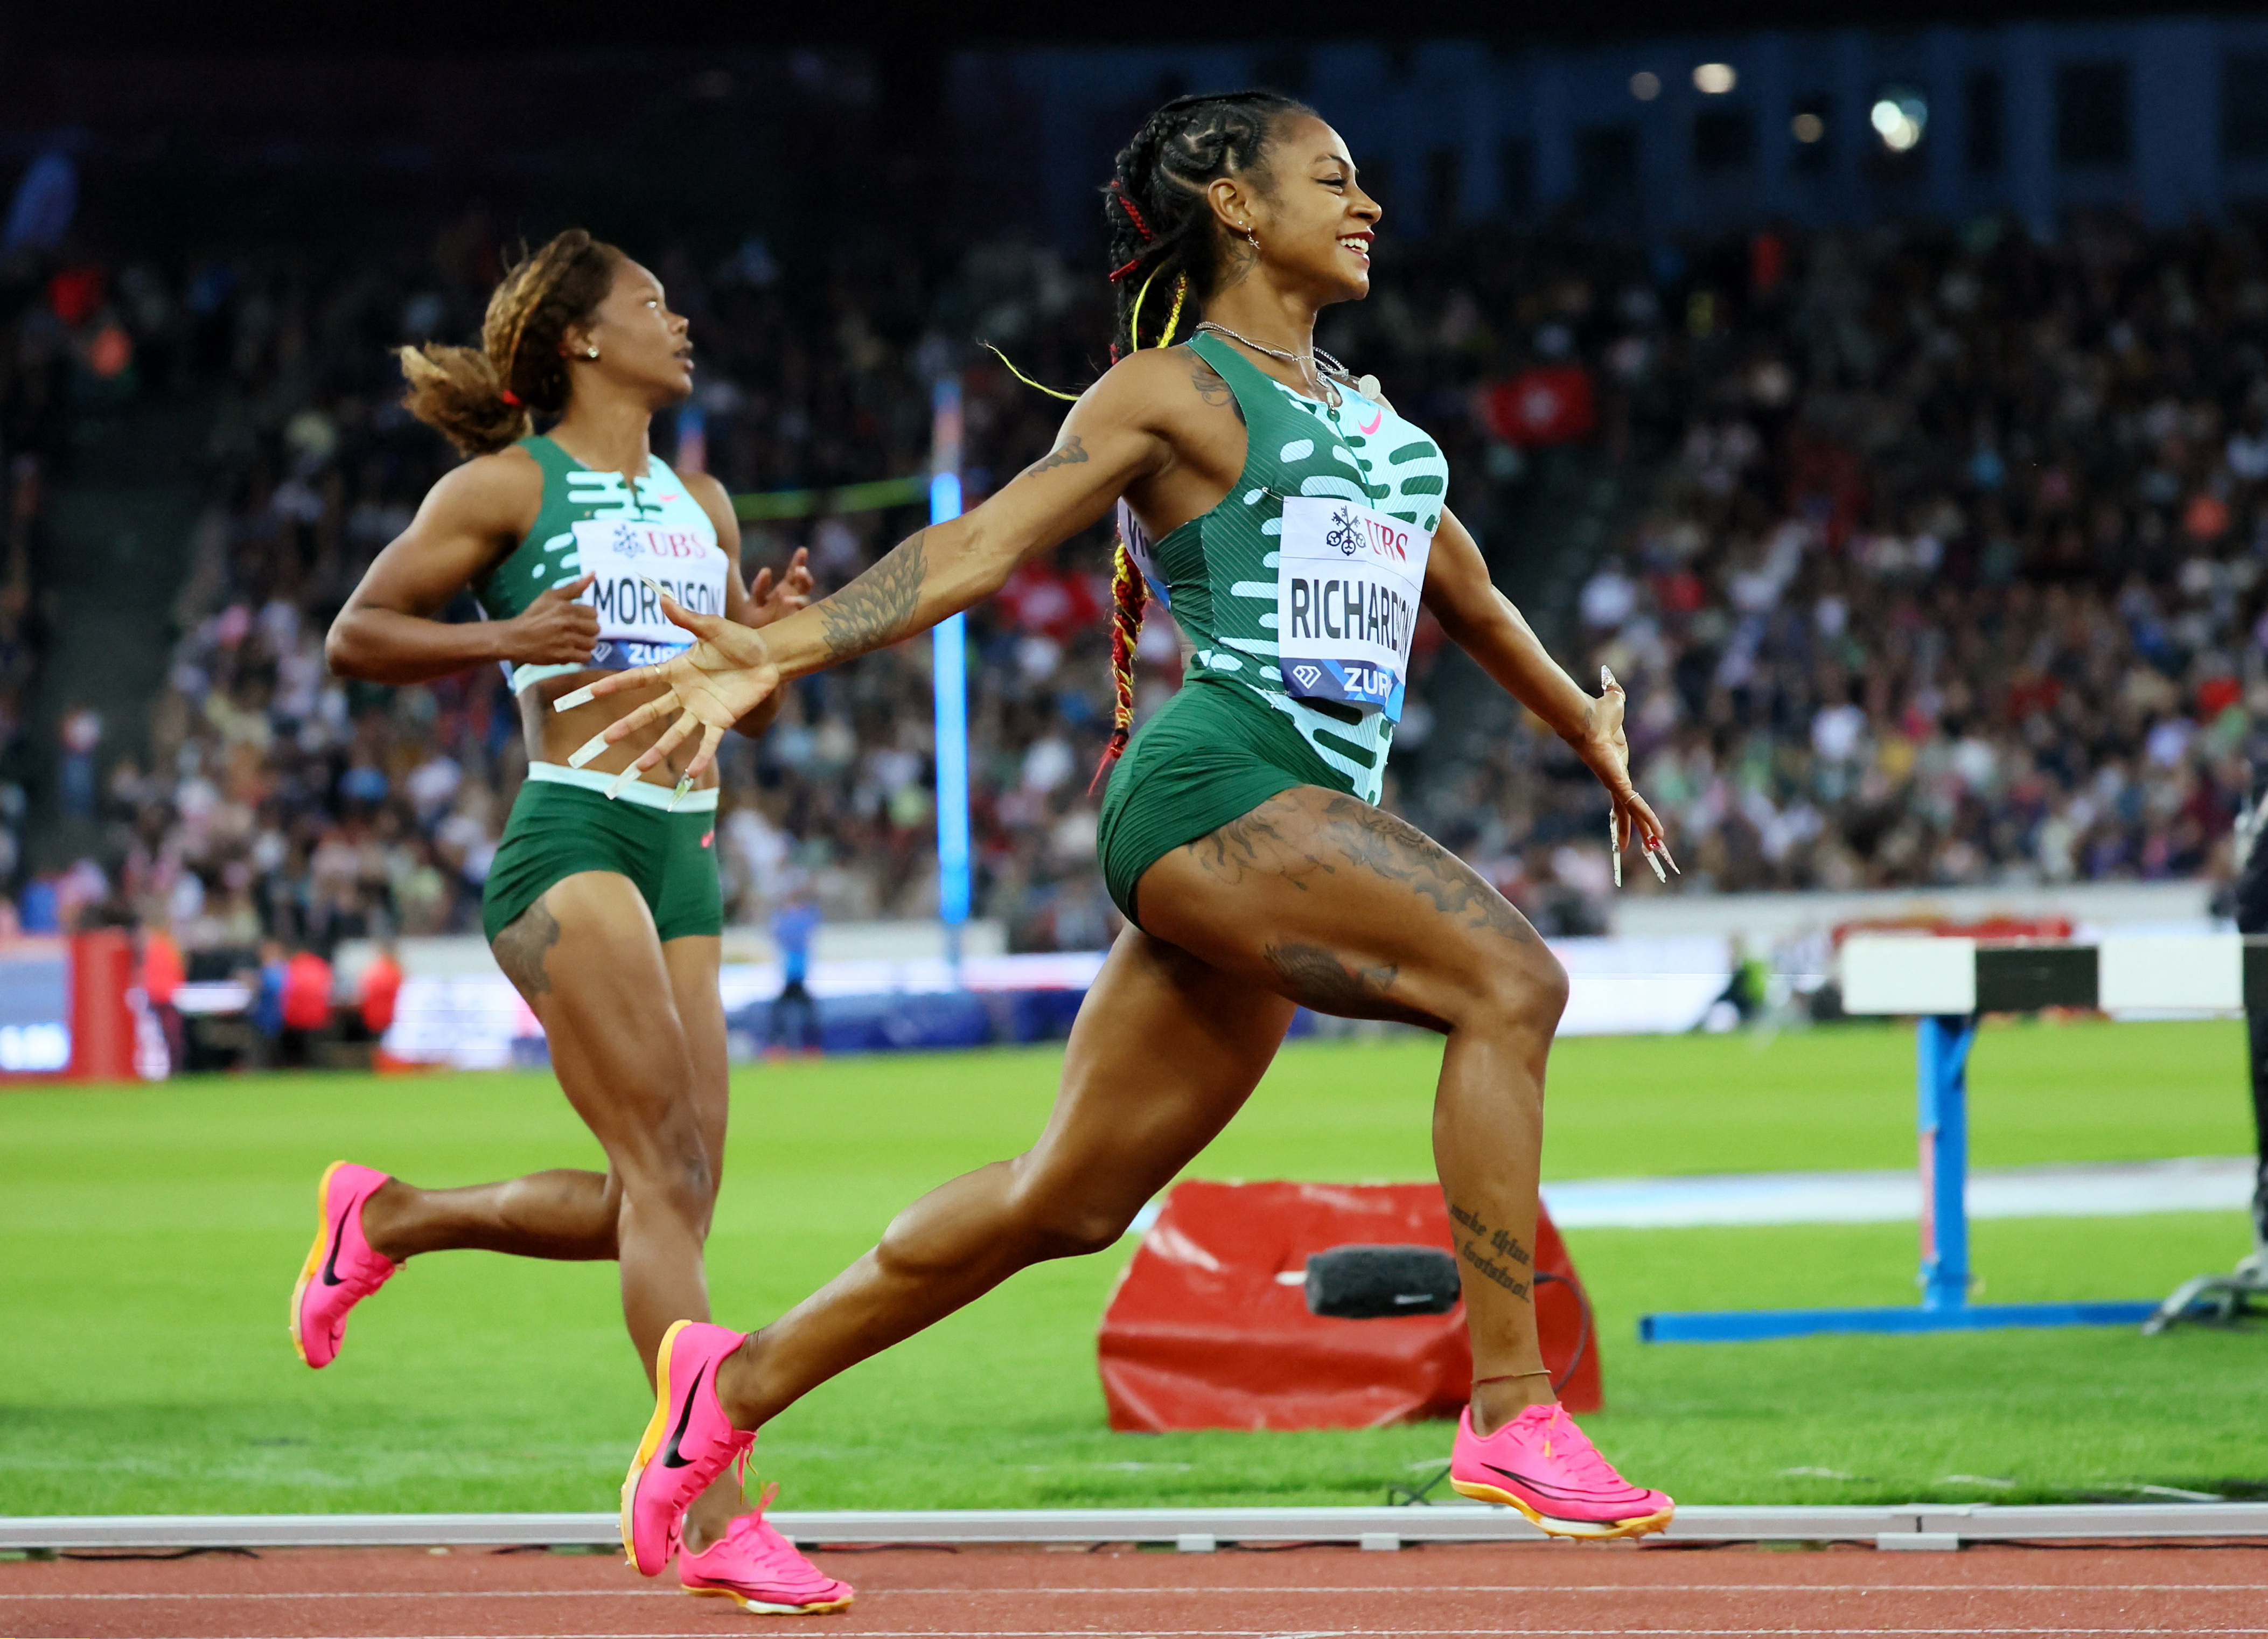 Track and field: All women's 100m world champions in the history